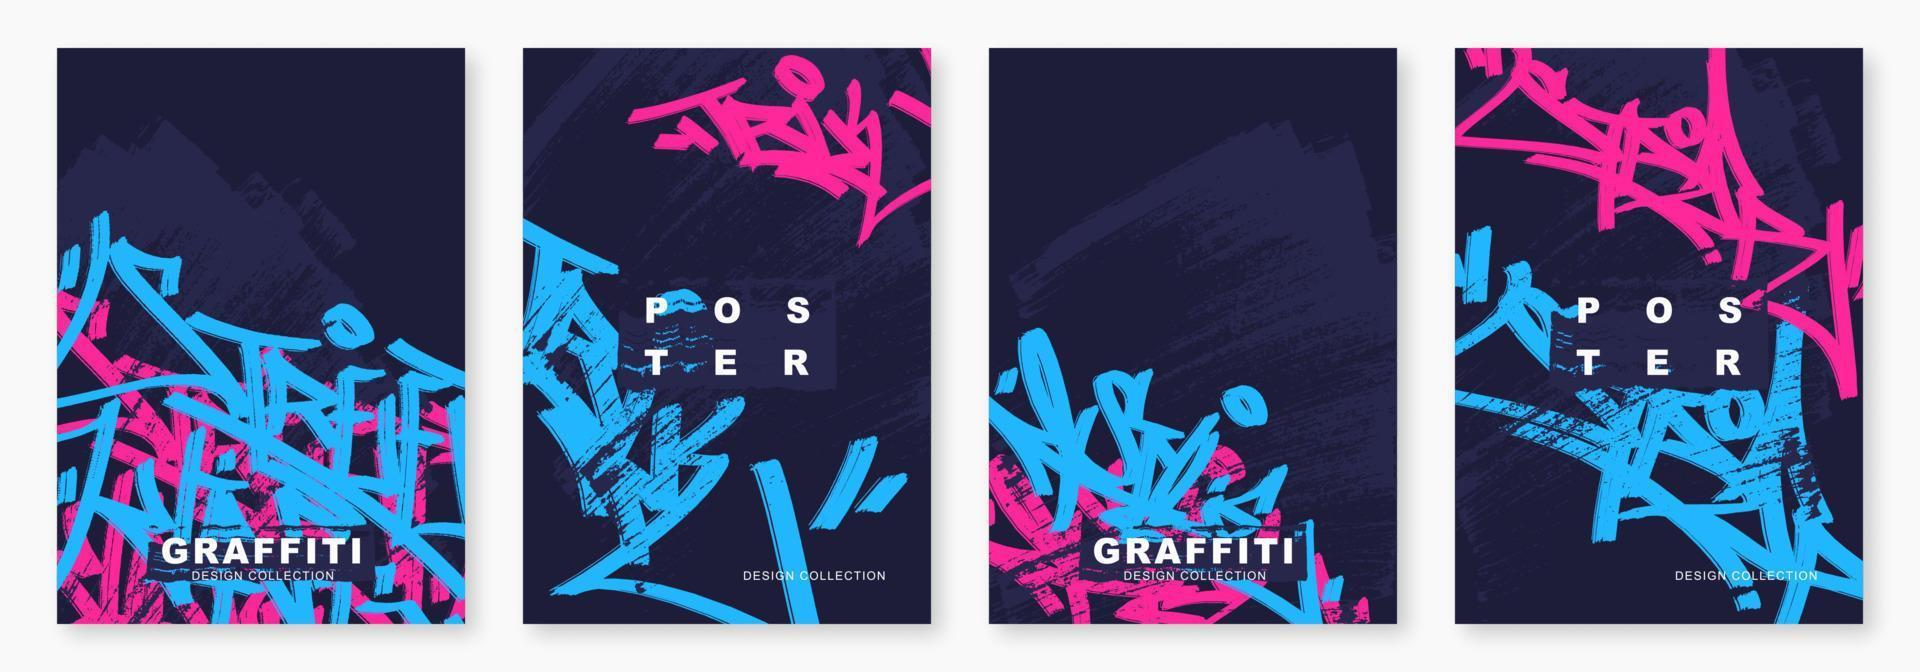 Bright graffiti tags with marker, vector illustration. Street art poster template.Colorful hip hop background with mixed letters